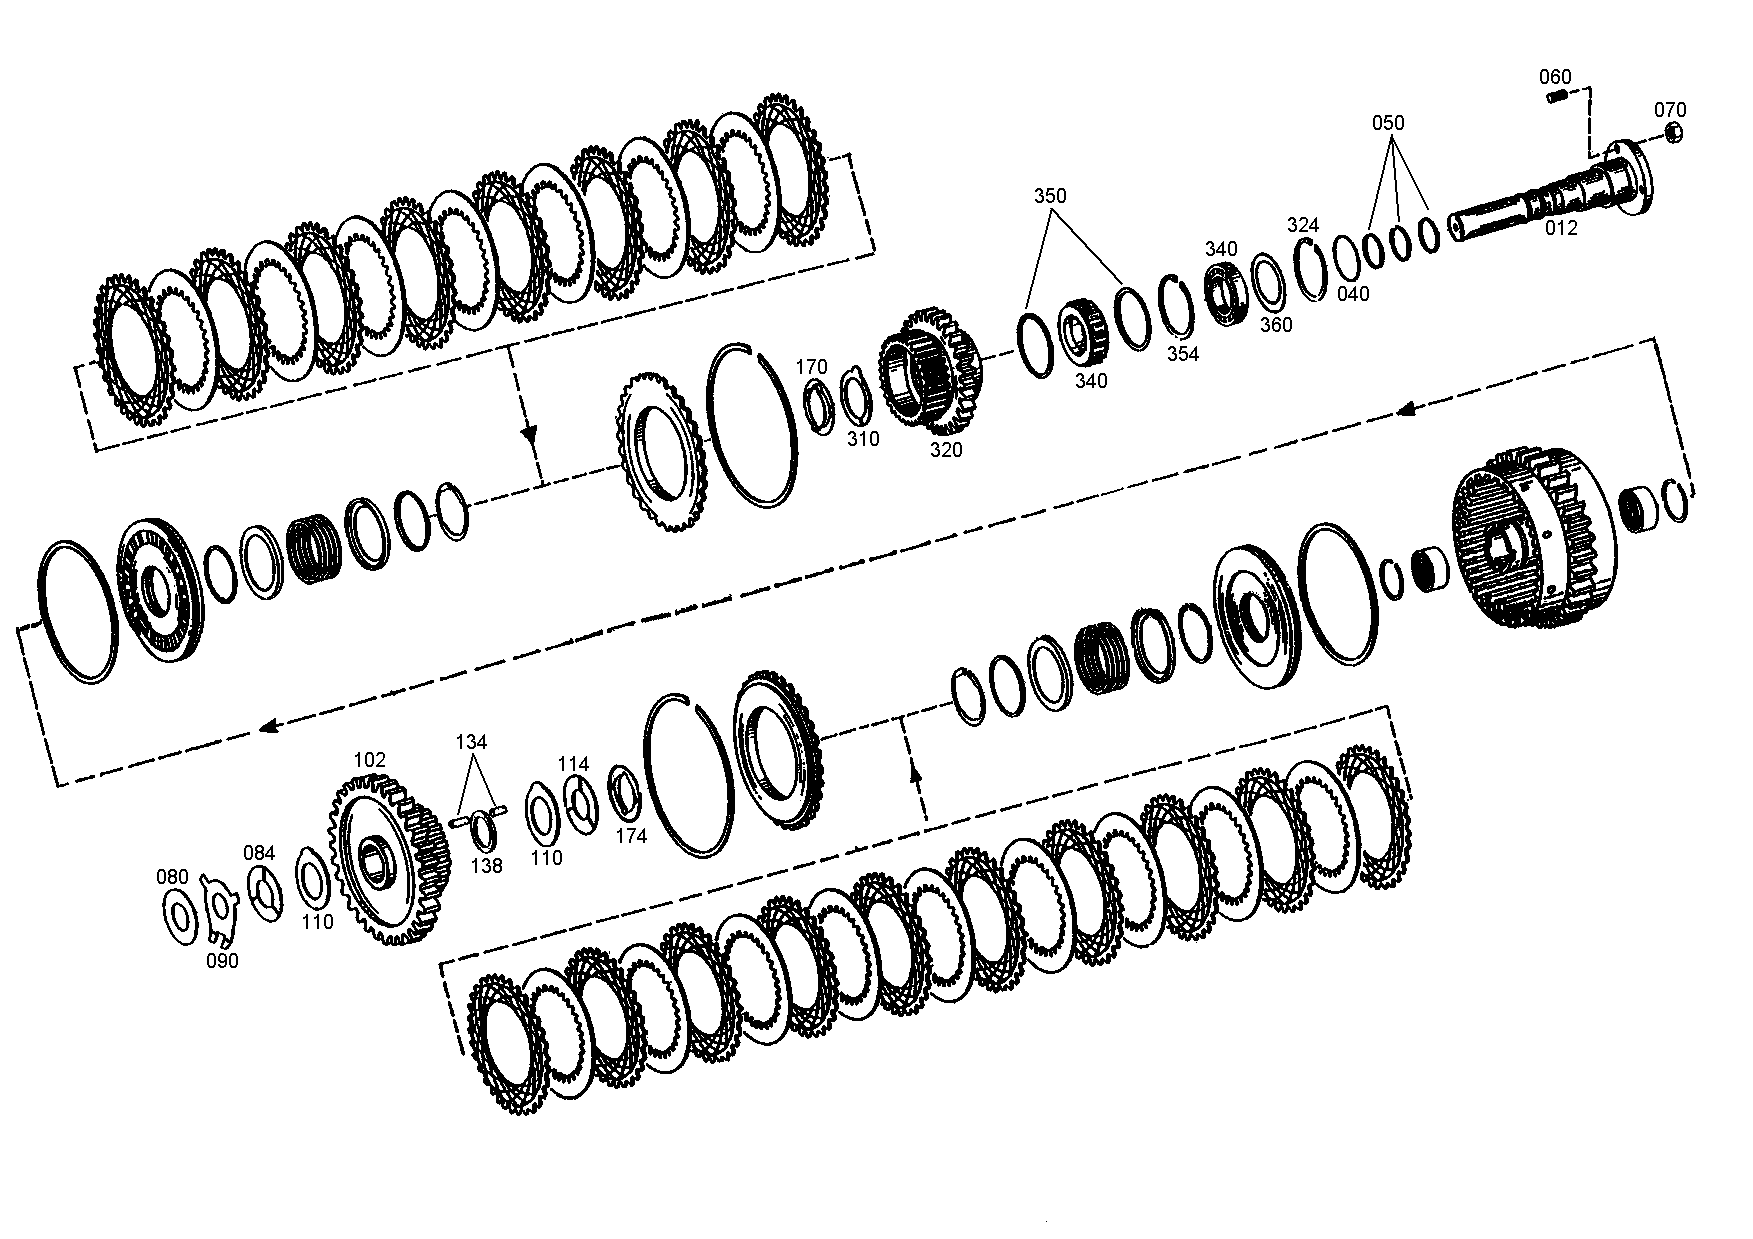 drawing for NACCO-IRV 1390849 - ROLLER CAGE (figure 5)